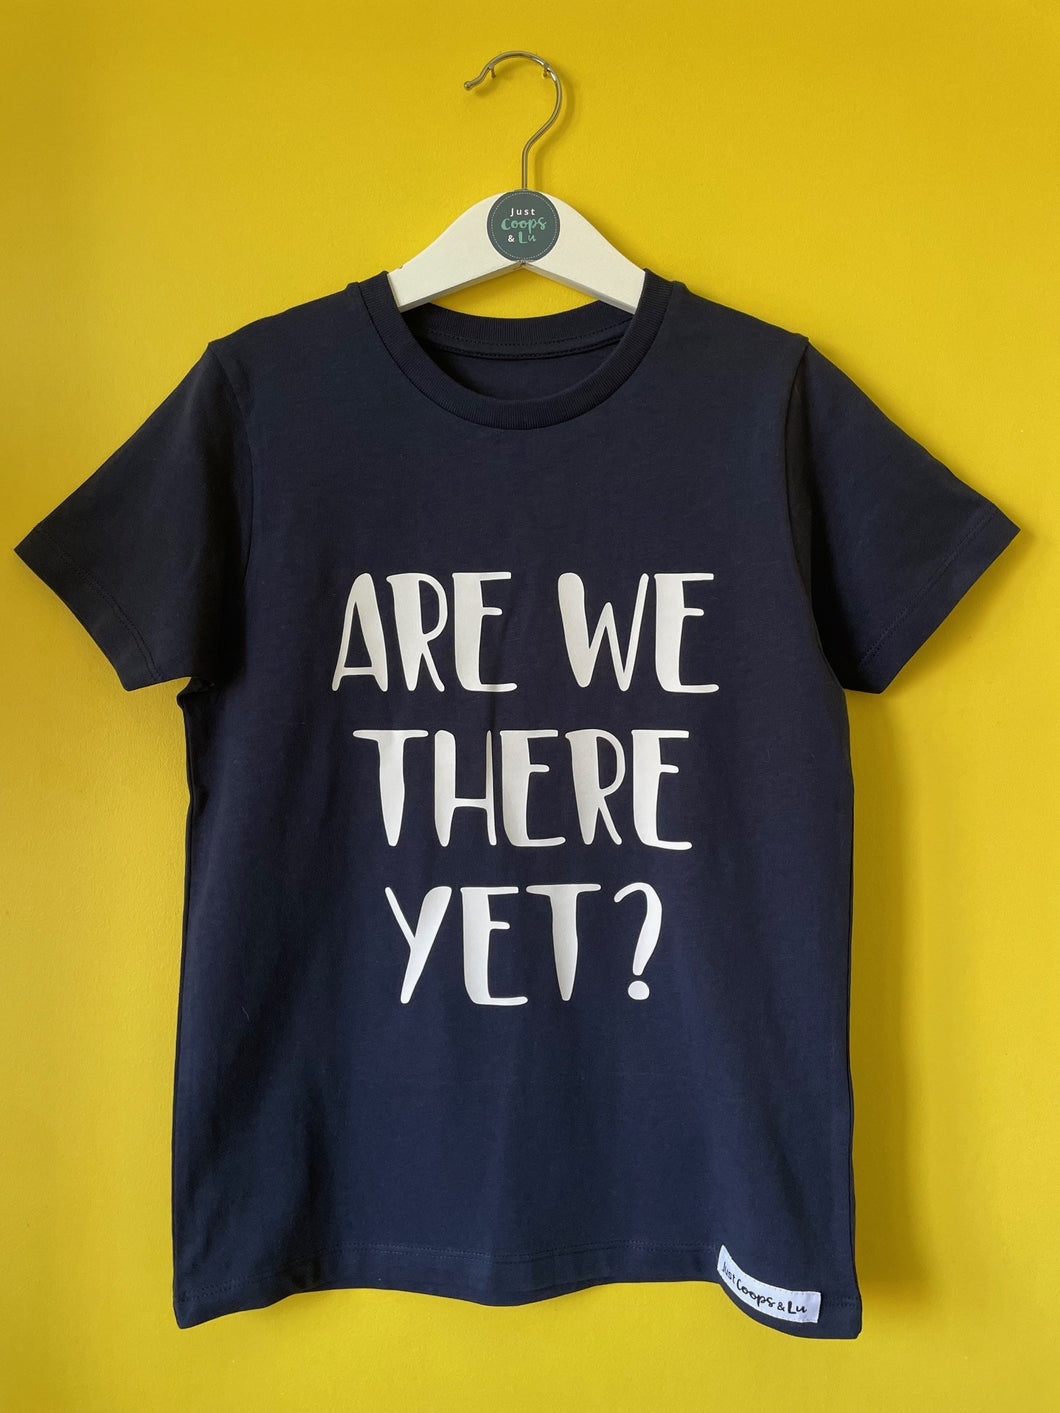 Kids - Are We There Yet? Organic T-shirt - Various colours